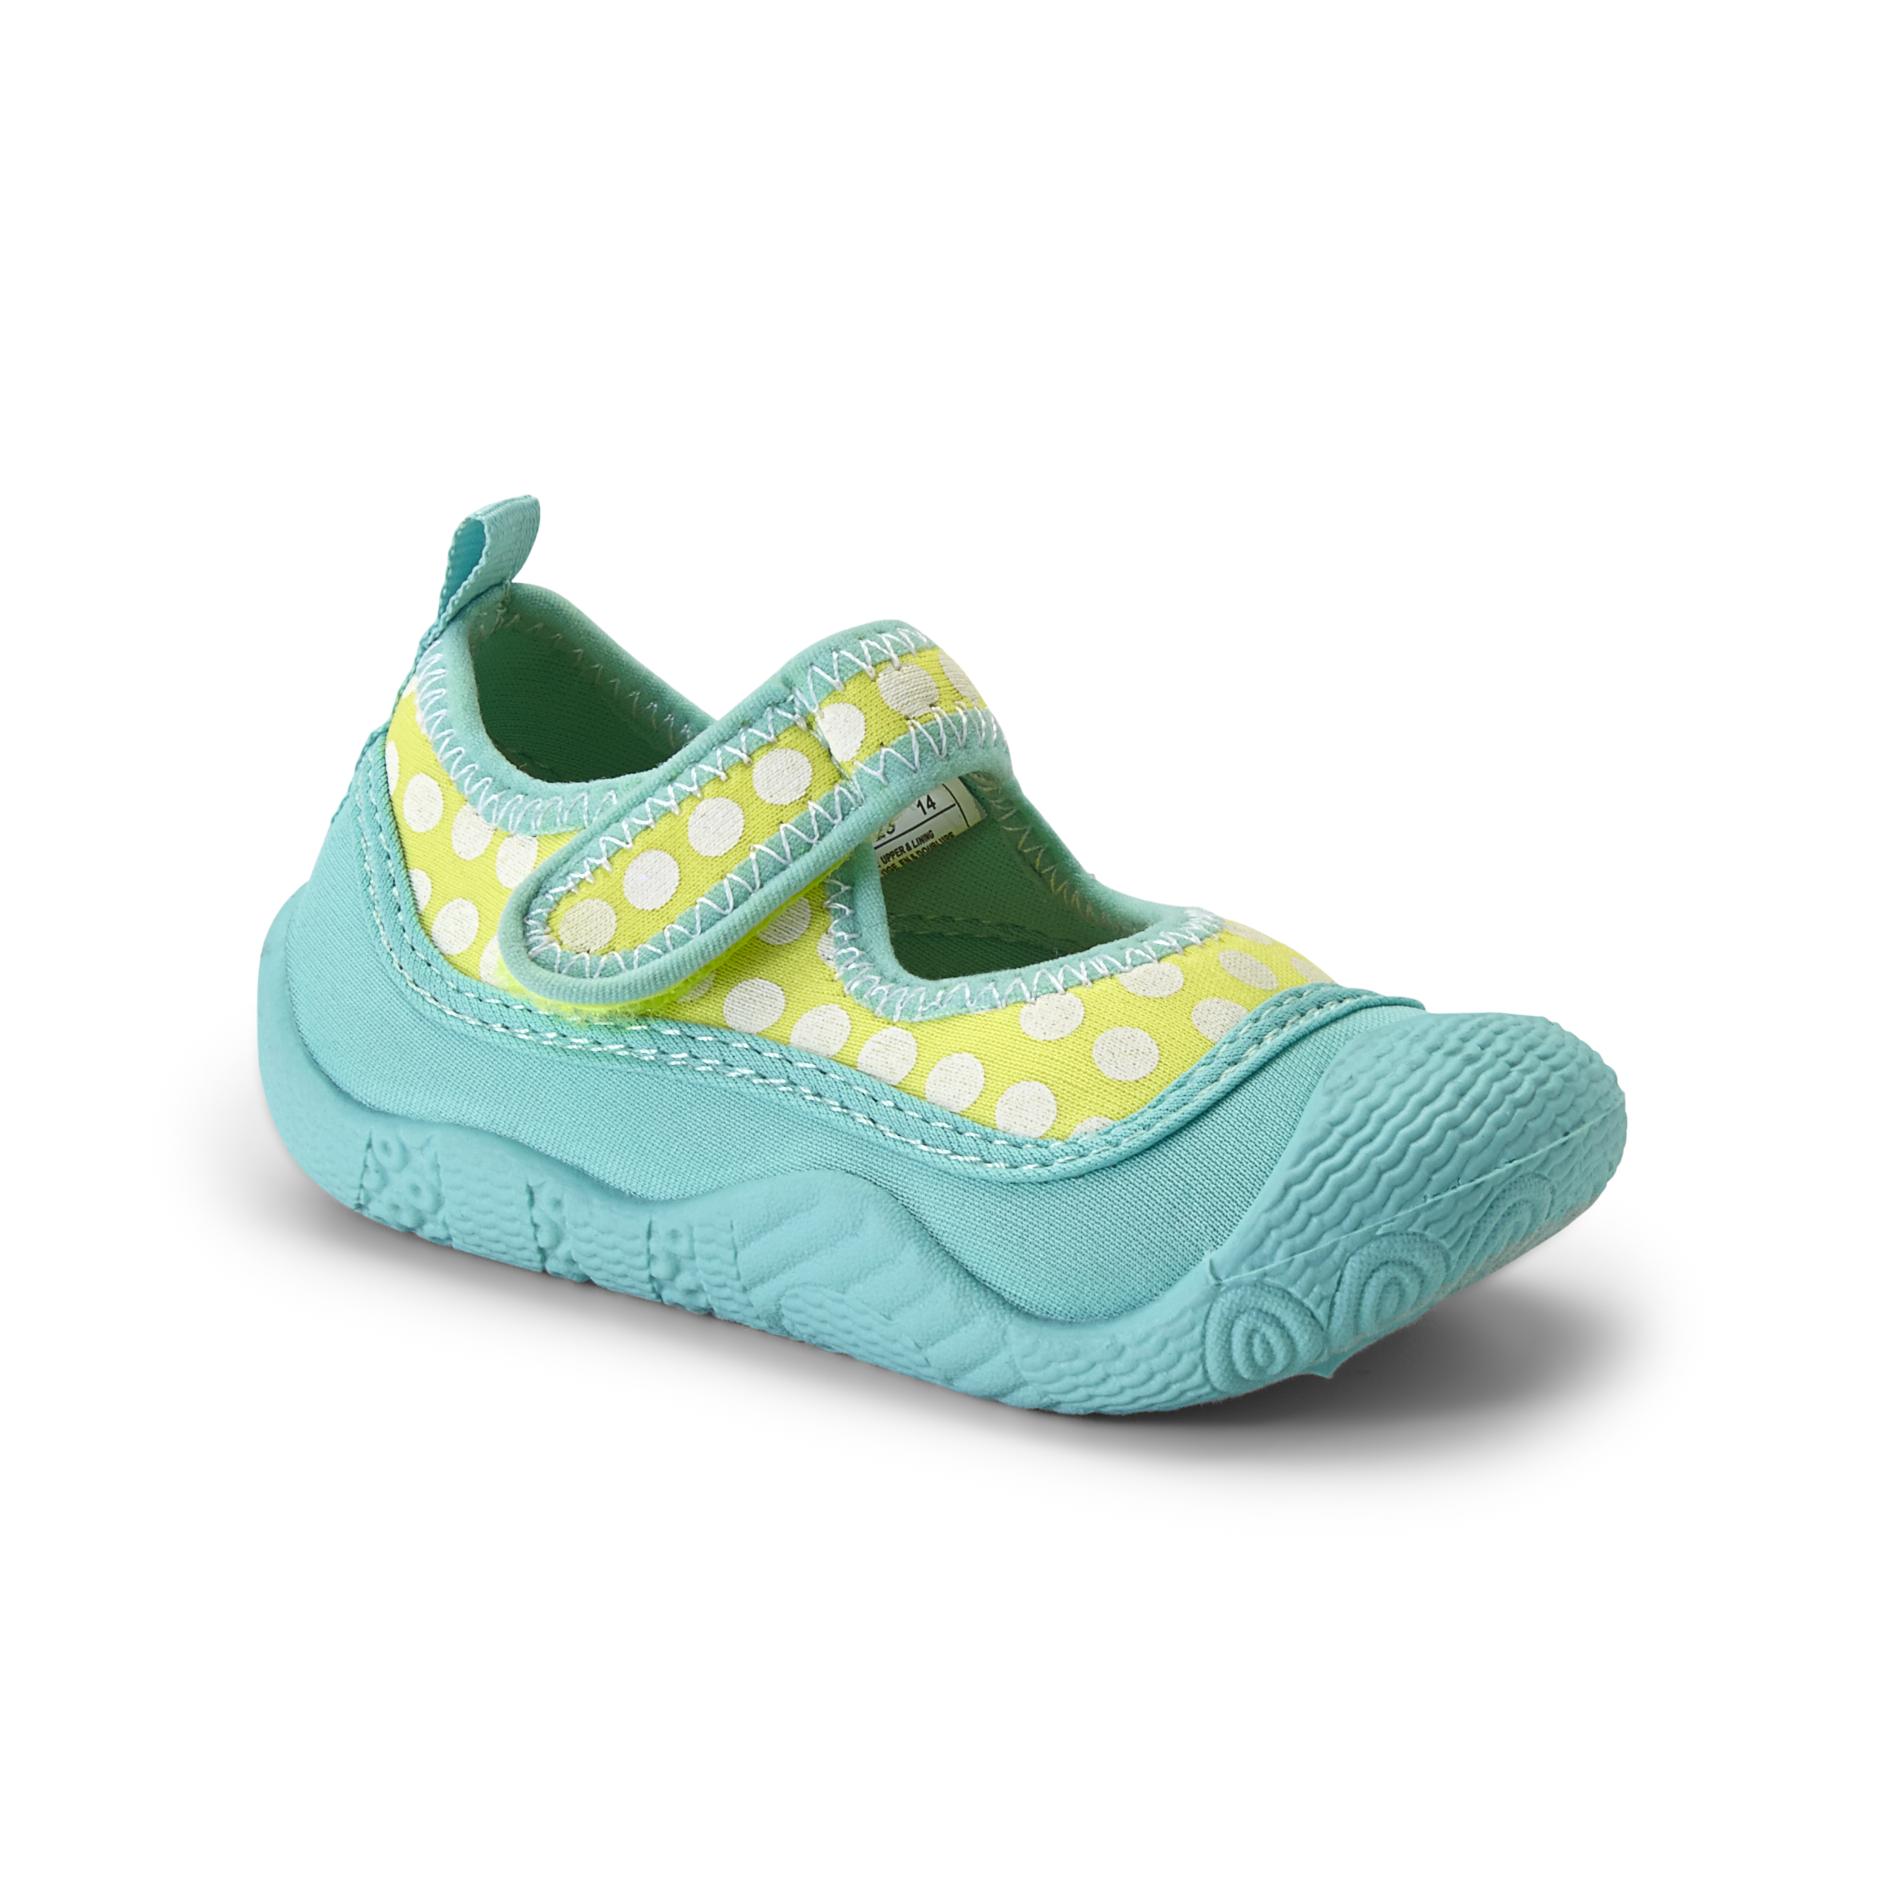 Carter's Toddler Girl's Indico Turquoise/White Sporty Shoe